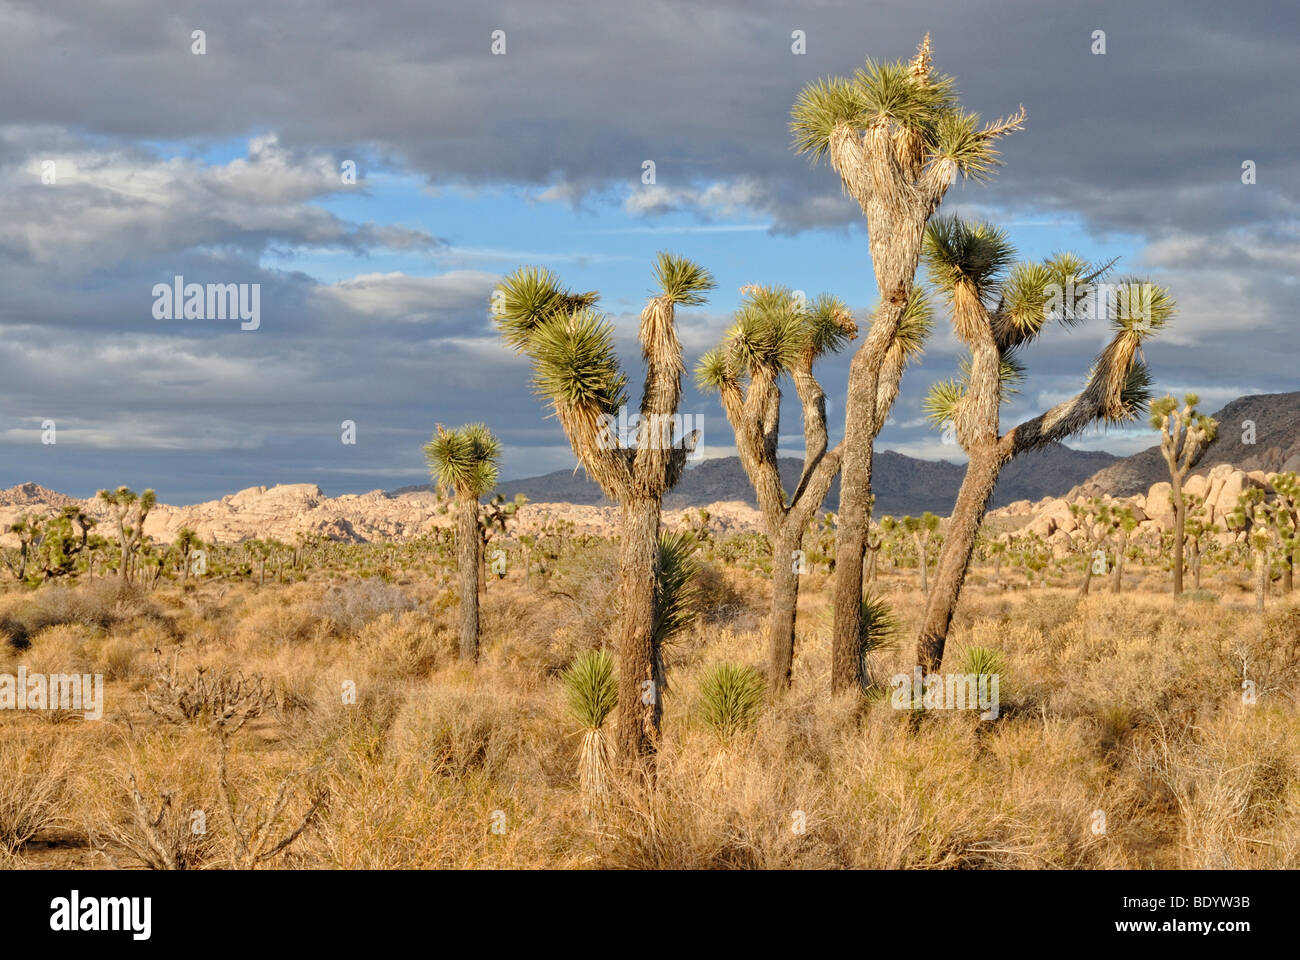 Joshua Trees (Yucca brevifolia) in front of monzogranite formations, Joshua Tree National Park, Palm Desert, Southern Californi Stock Photo